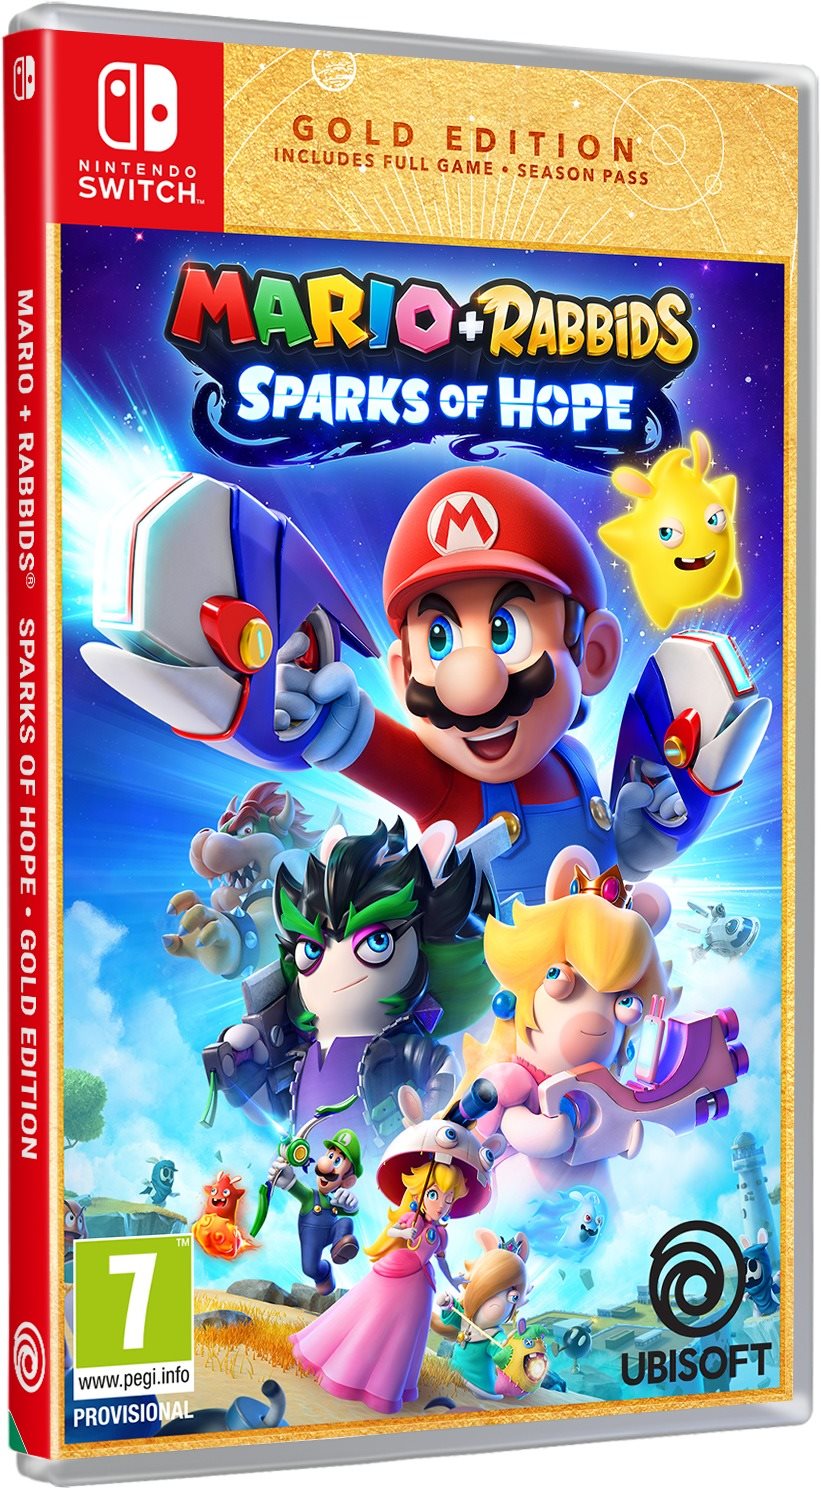 Mario + Rabbids Sparks of Hope: Gold Edition - Nintendo Switch